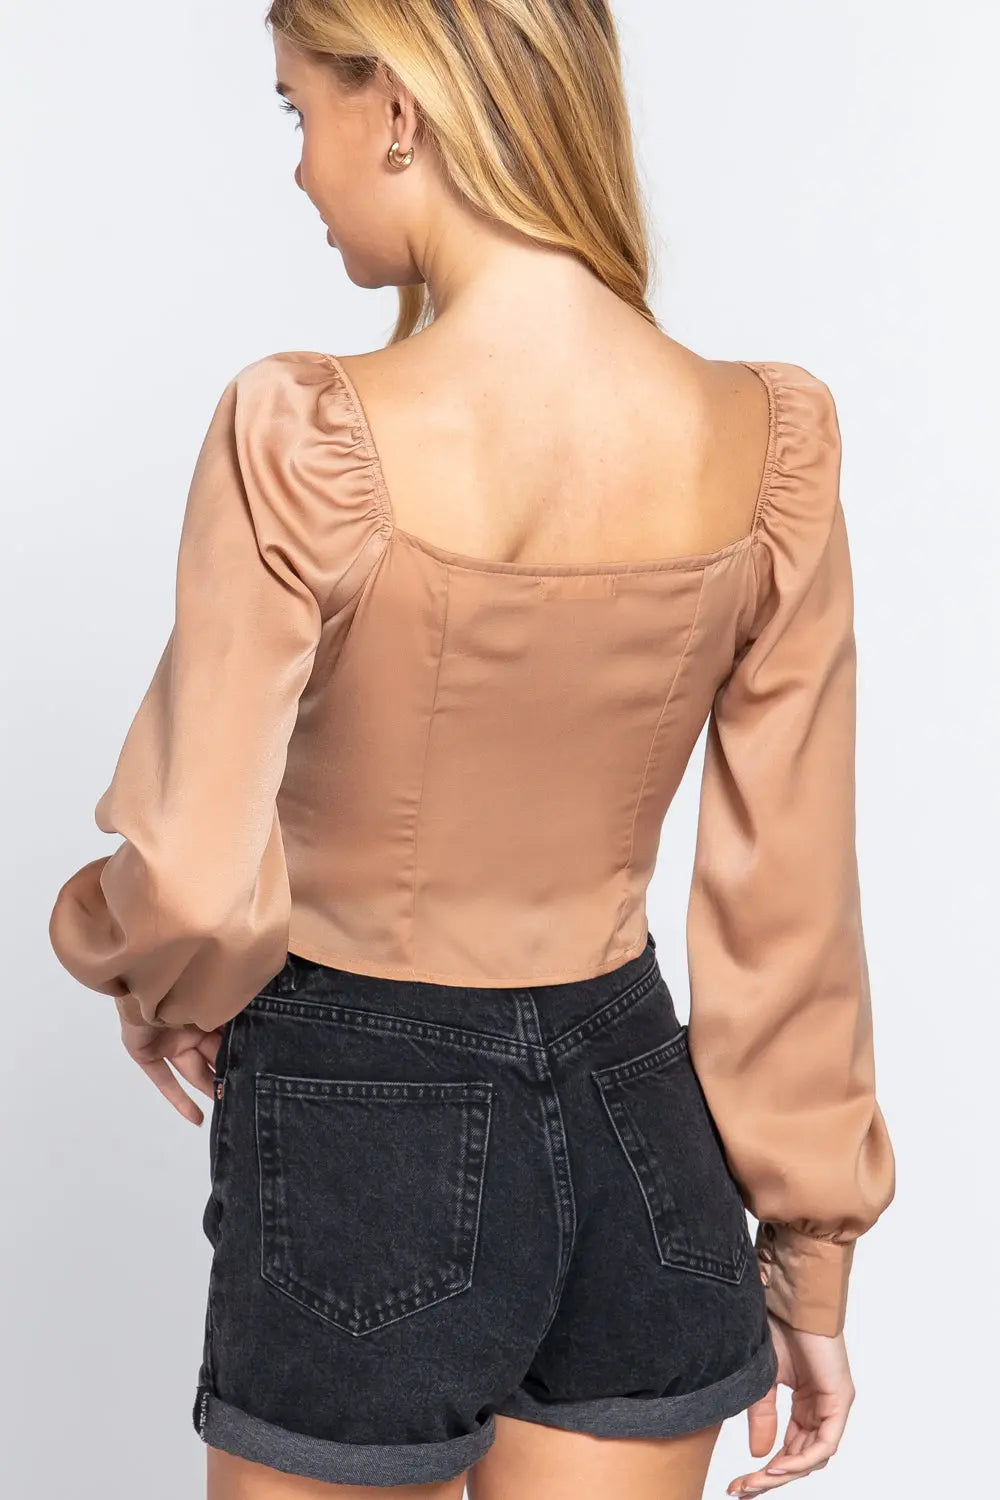 Long Sleeve Sweetheart Neck Front Ribbon Tie Detail Woven Top Sunny EvE Fashion